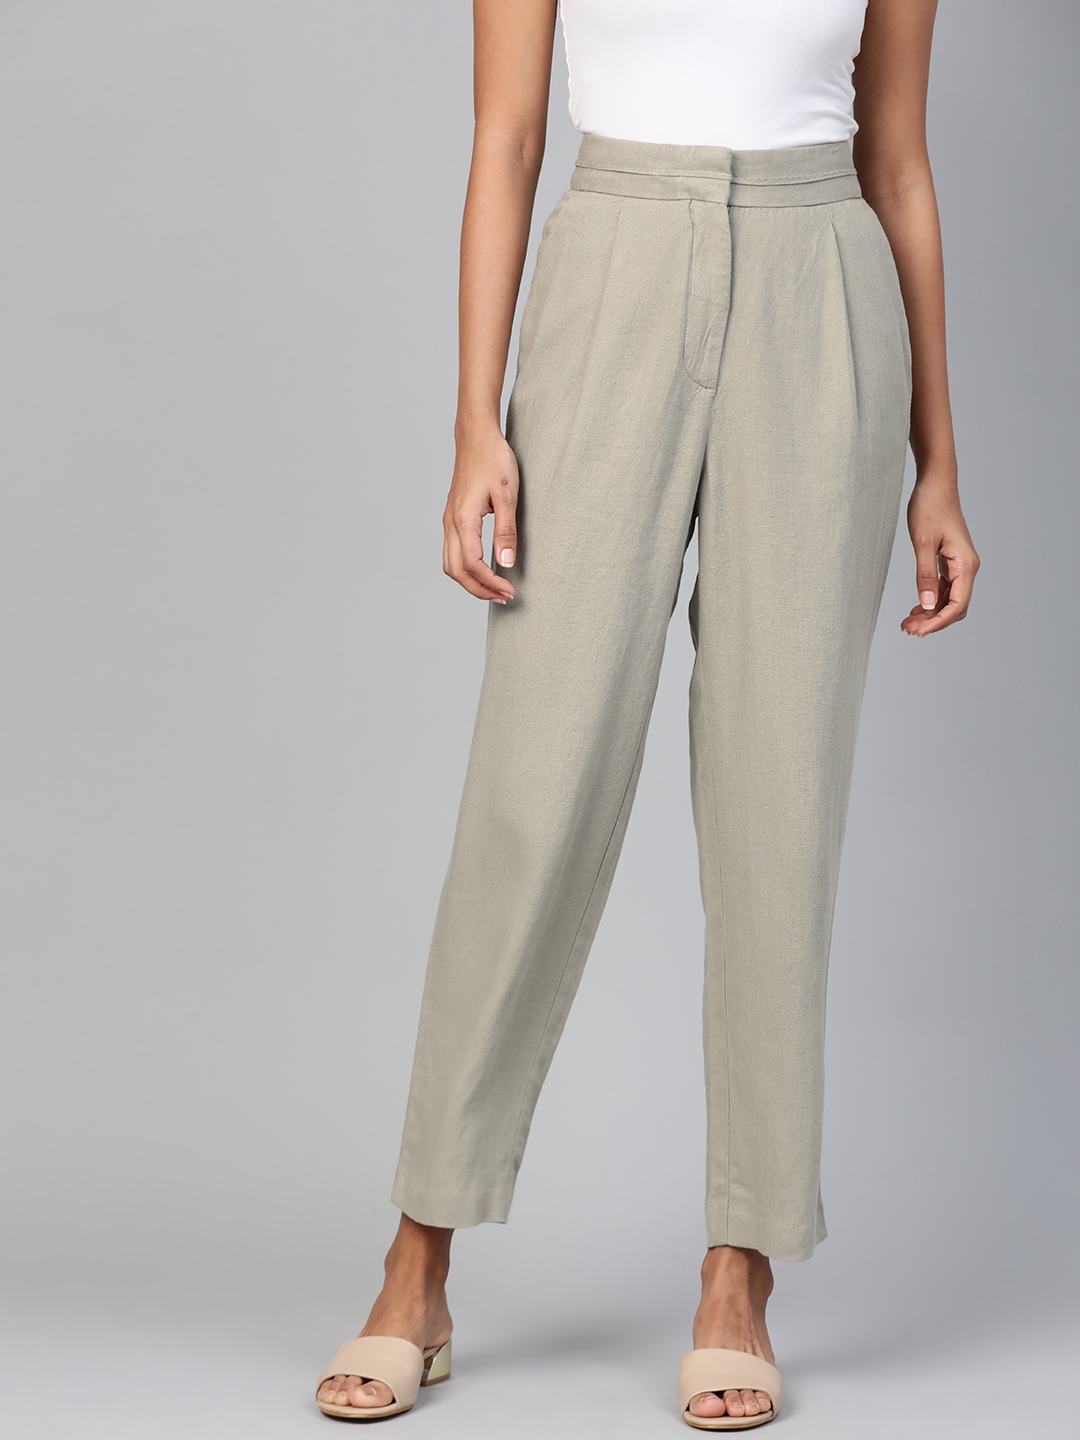 Olive Green Textured Formal Pants Women, 59% OFF